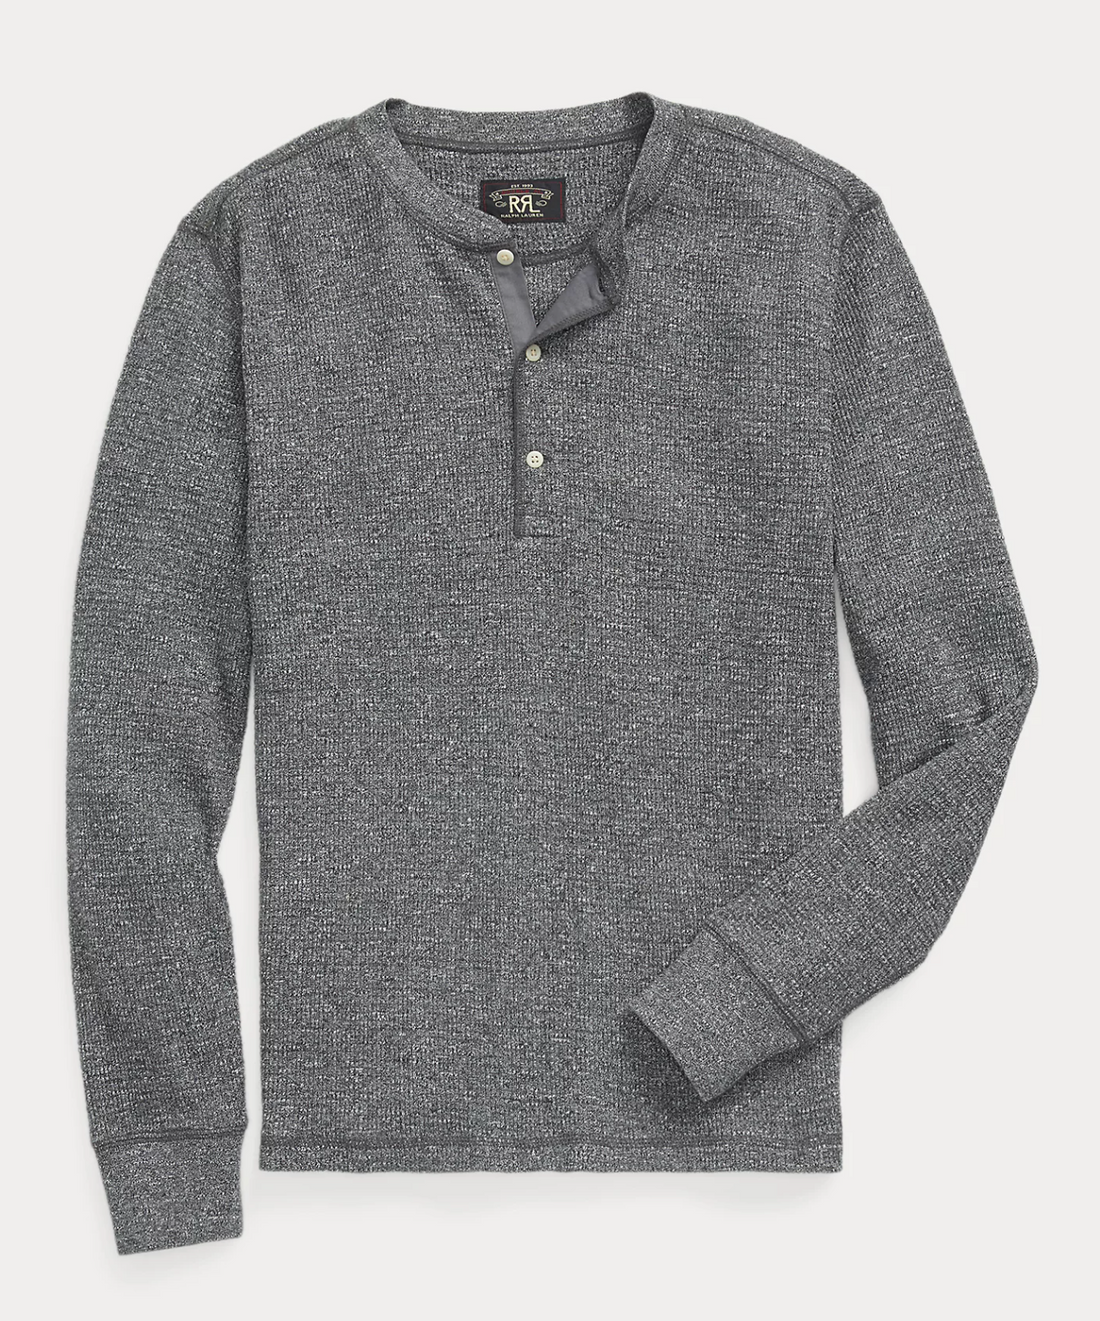 Double RL - Garment-Dyed Waffle-Knit Henley Shirt in Charcoal Heather